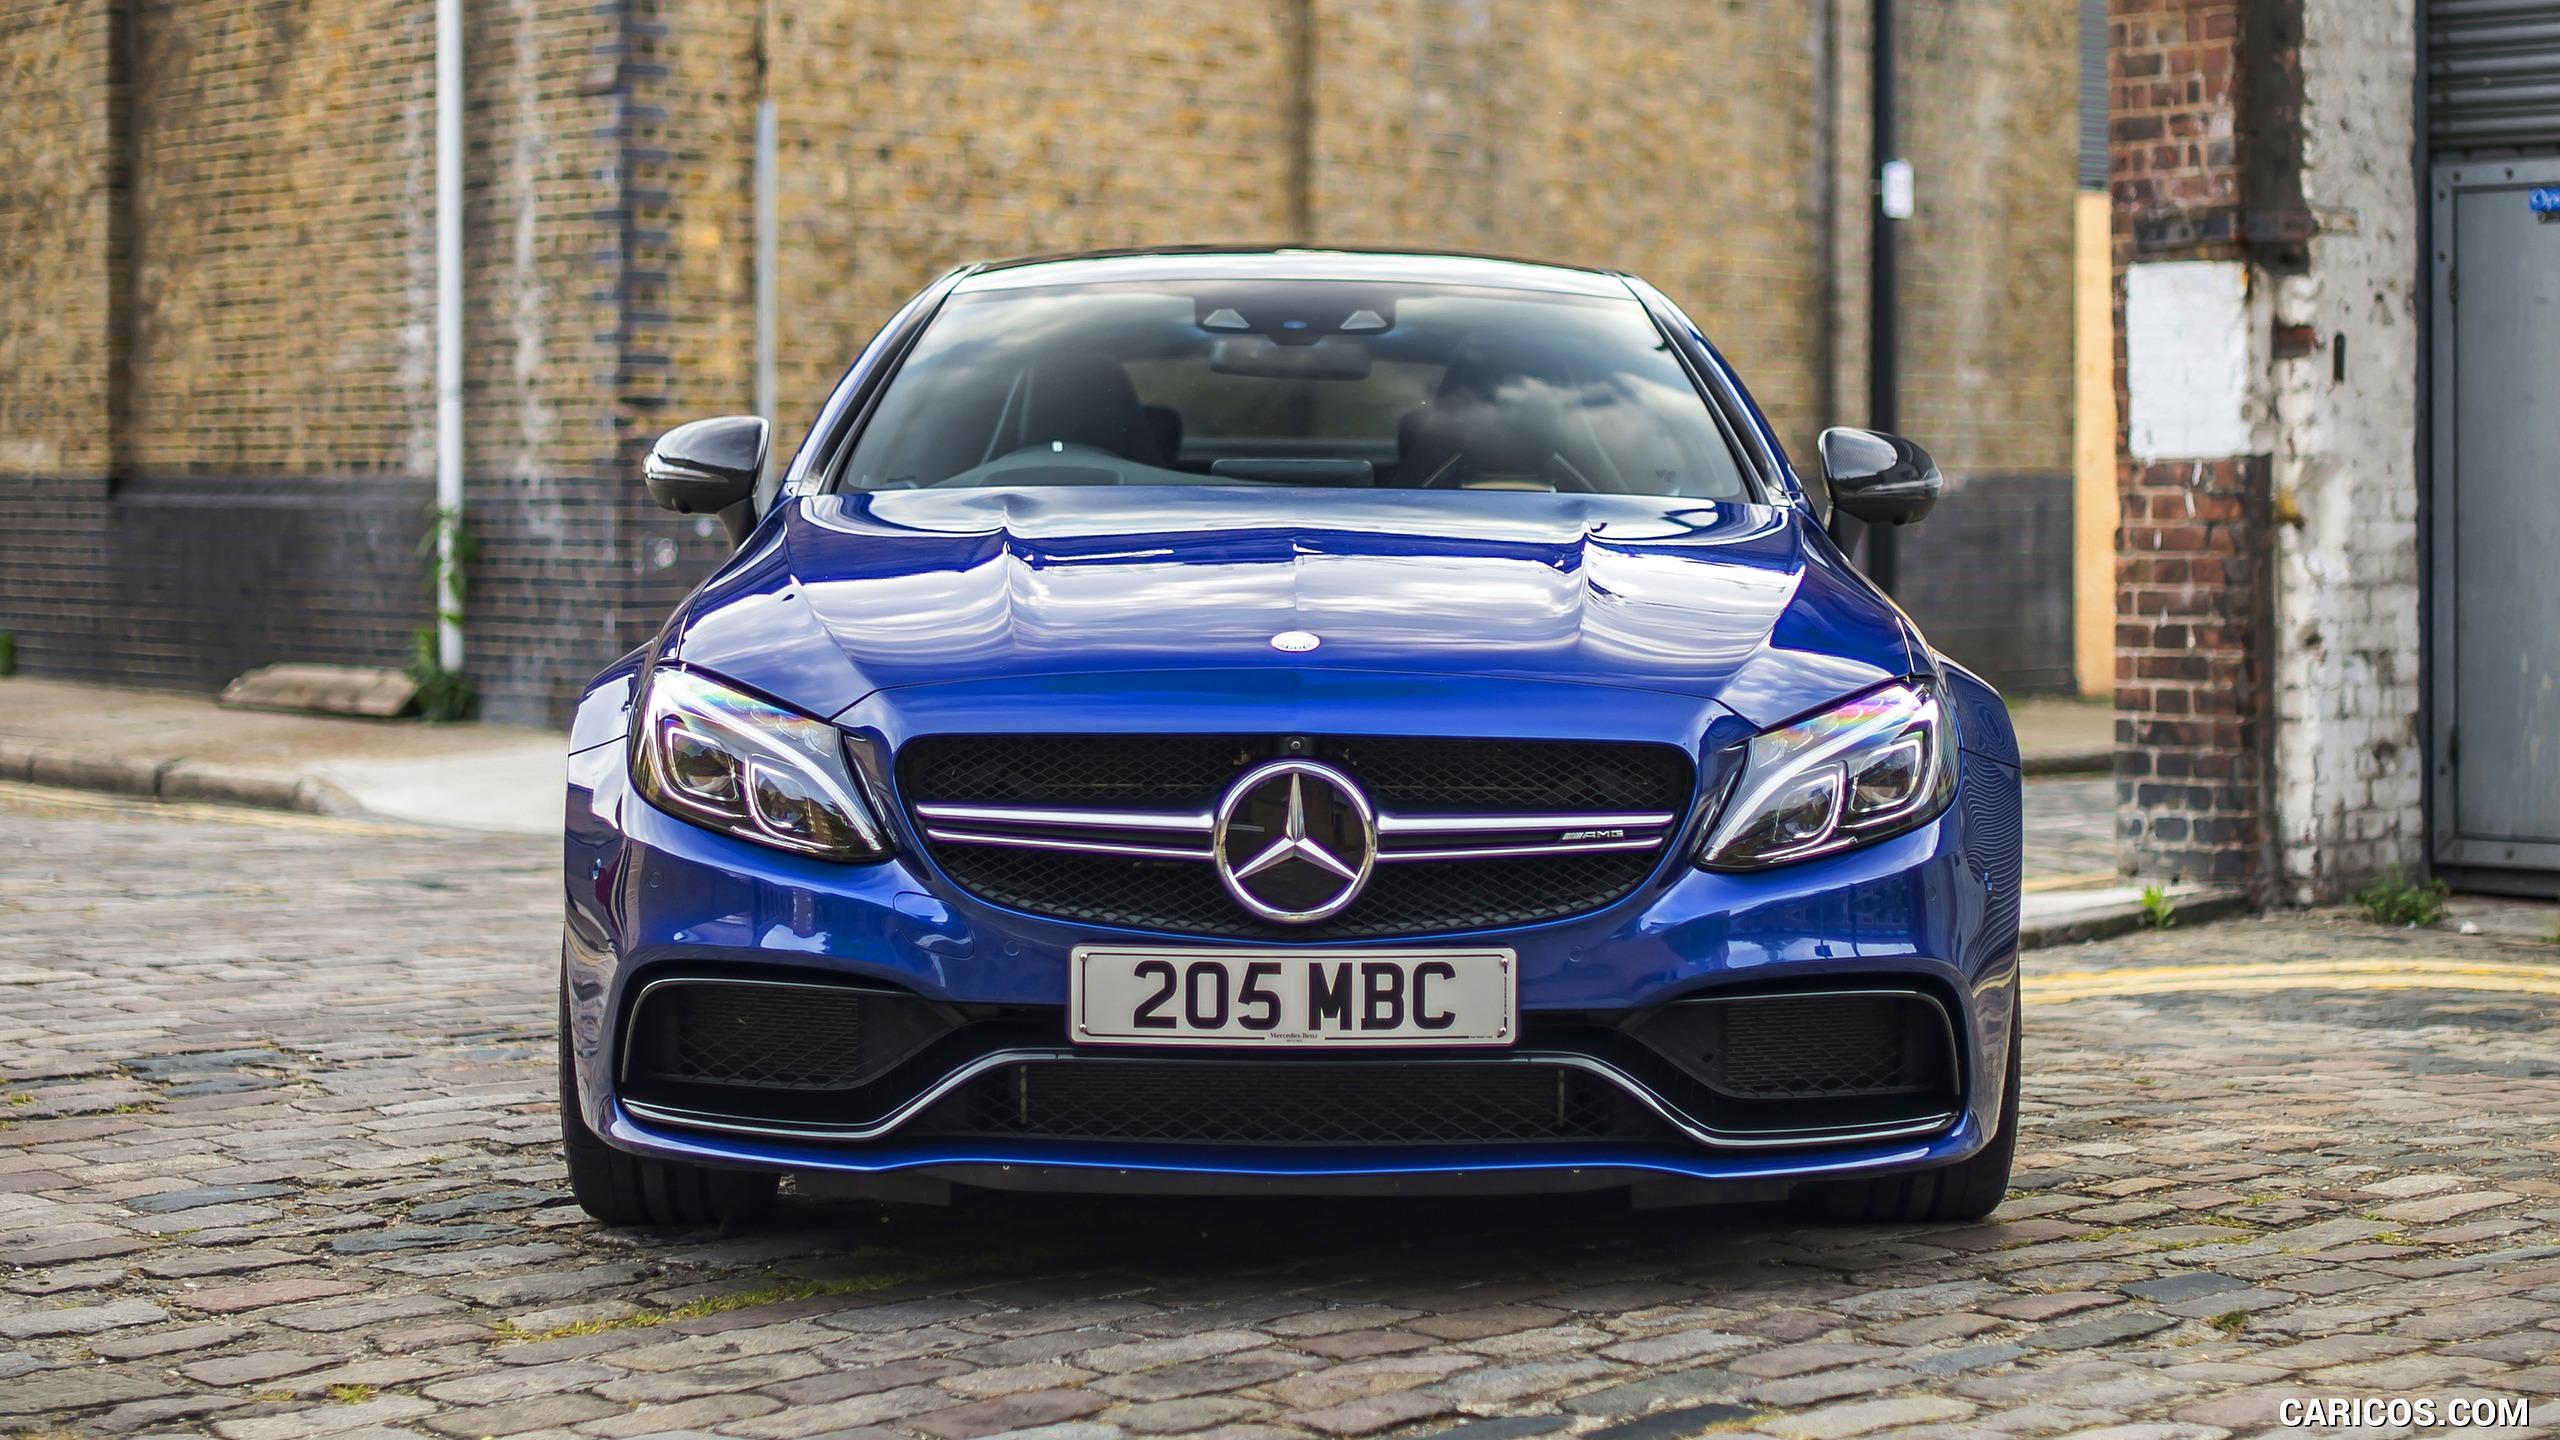 2017 Mercedes-AMG C63 S Coupe (UK-Spec) - Front, #21 of 52